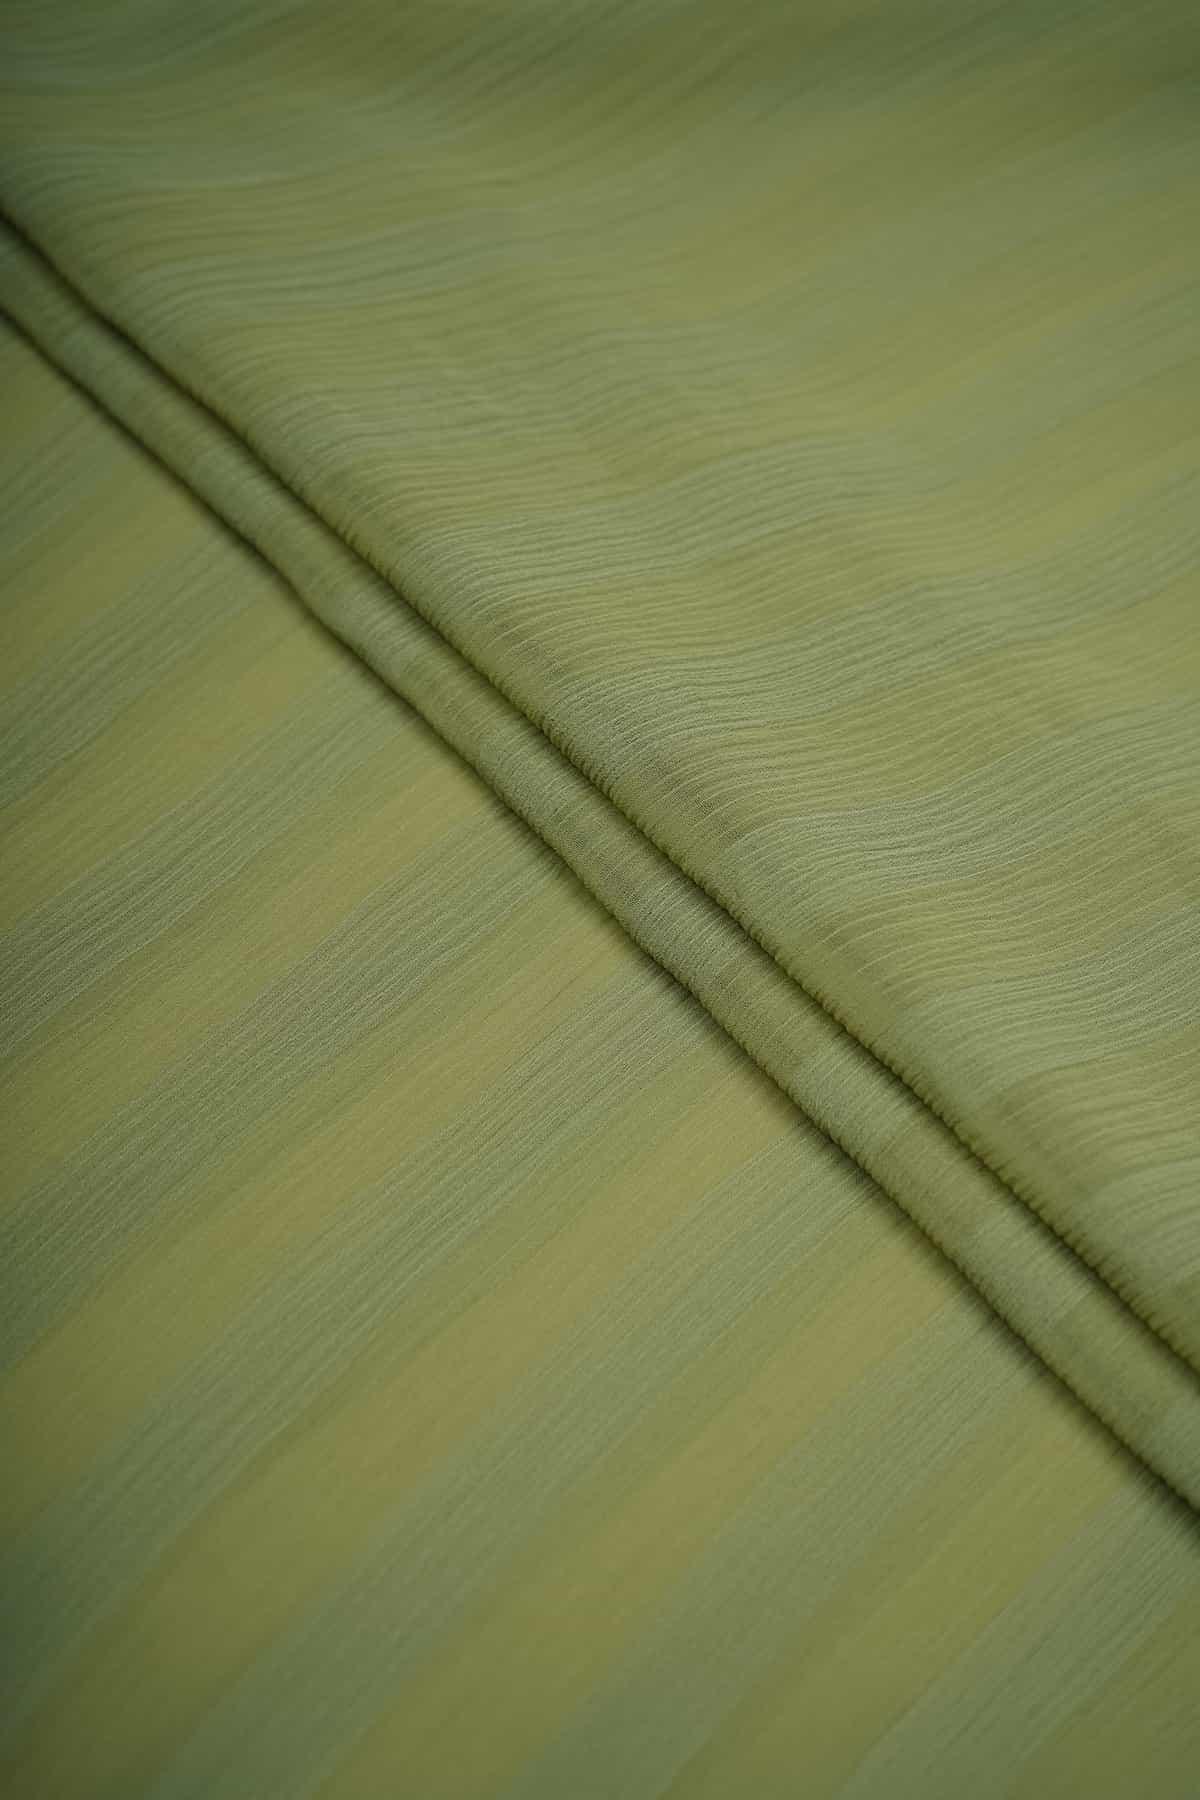 Plain Dyed Shanaya Chiffon - saraaha.com - casual Wear, Chiffon, Drapable, Dresses, Dull and Pastel Colors, Dupatas, Festive Wear, Formal Wear, Lehengas, Light Weight, Plain dyed, Polyester, Sarees, Sheer, Soft, Stripe Pattern, Suits, Wide Color Variety, women wear